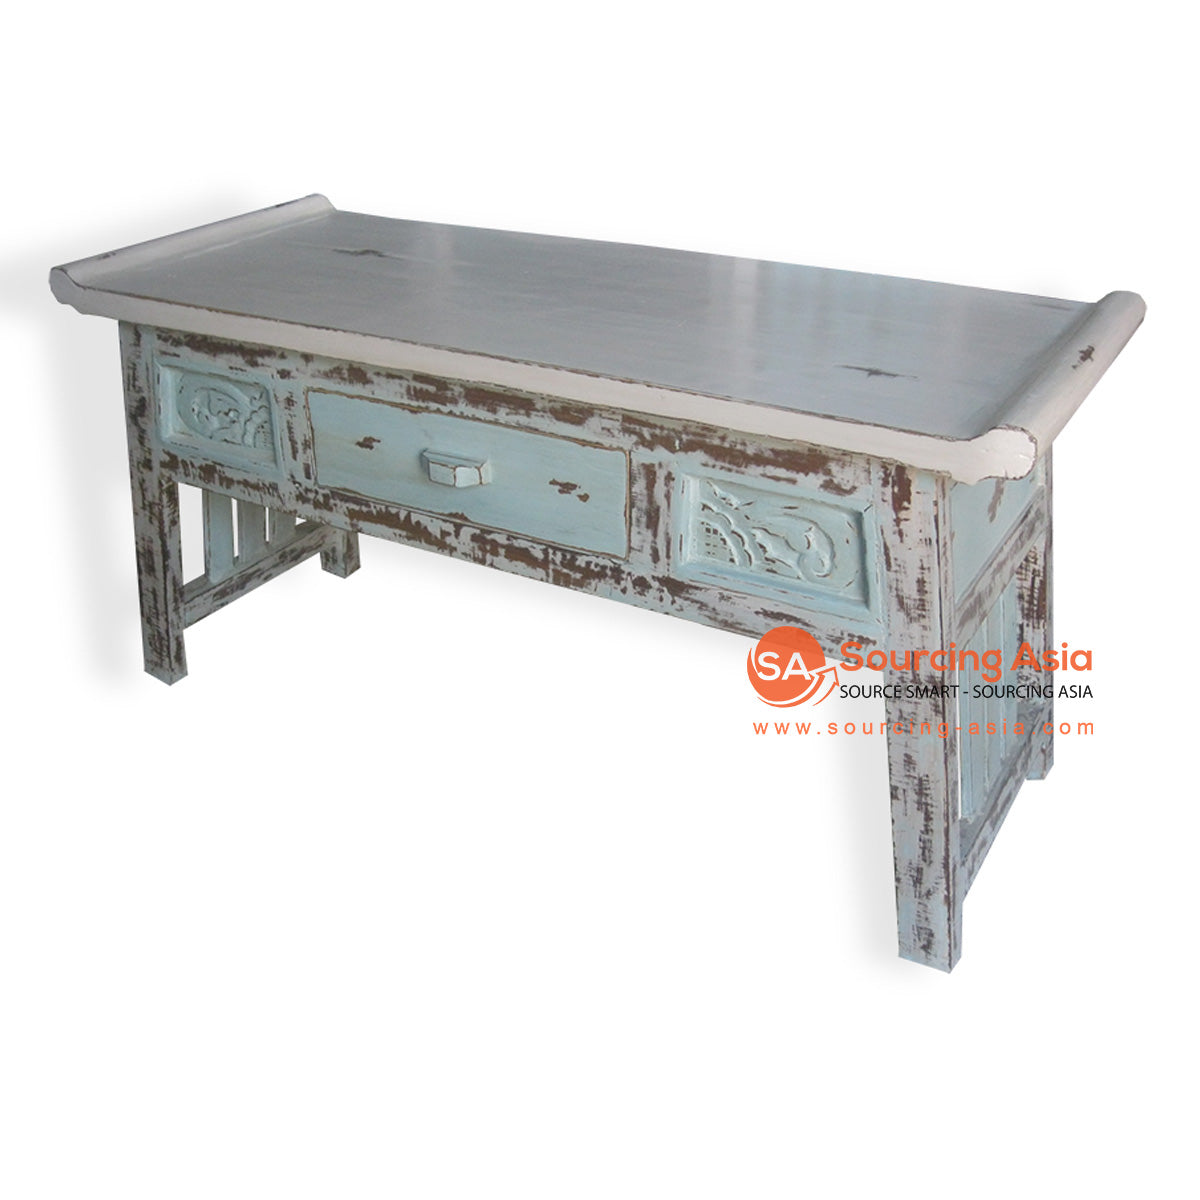 SIX016 TURQUOISE RECYCLED TEAK WOOD ONE DRAWER CARVED CONSOLE